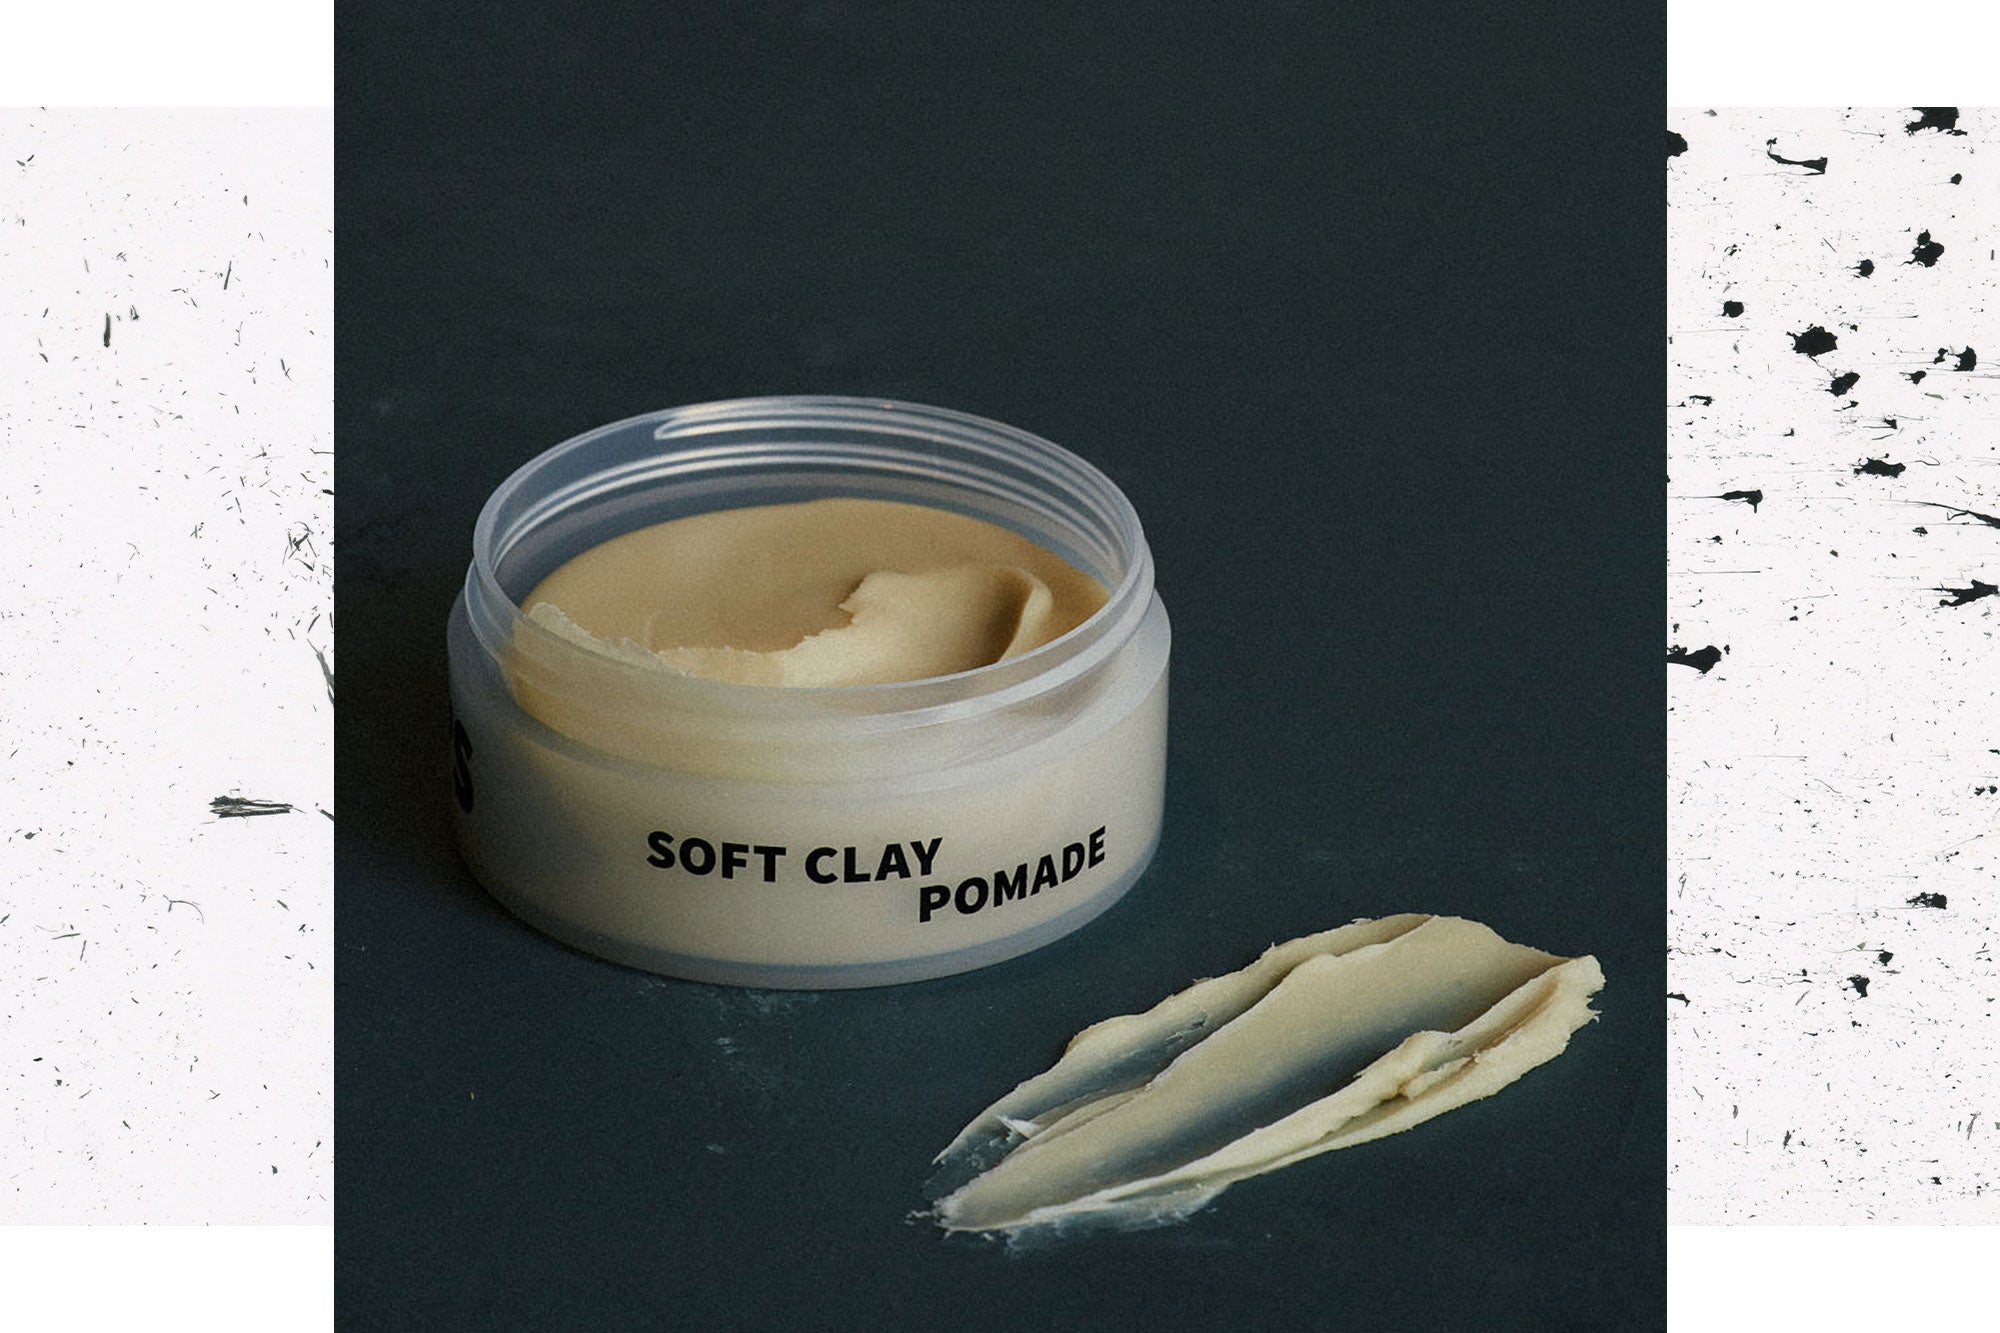 Image of Soft Clay Pomade on dark background with a swipe of product in the foreground